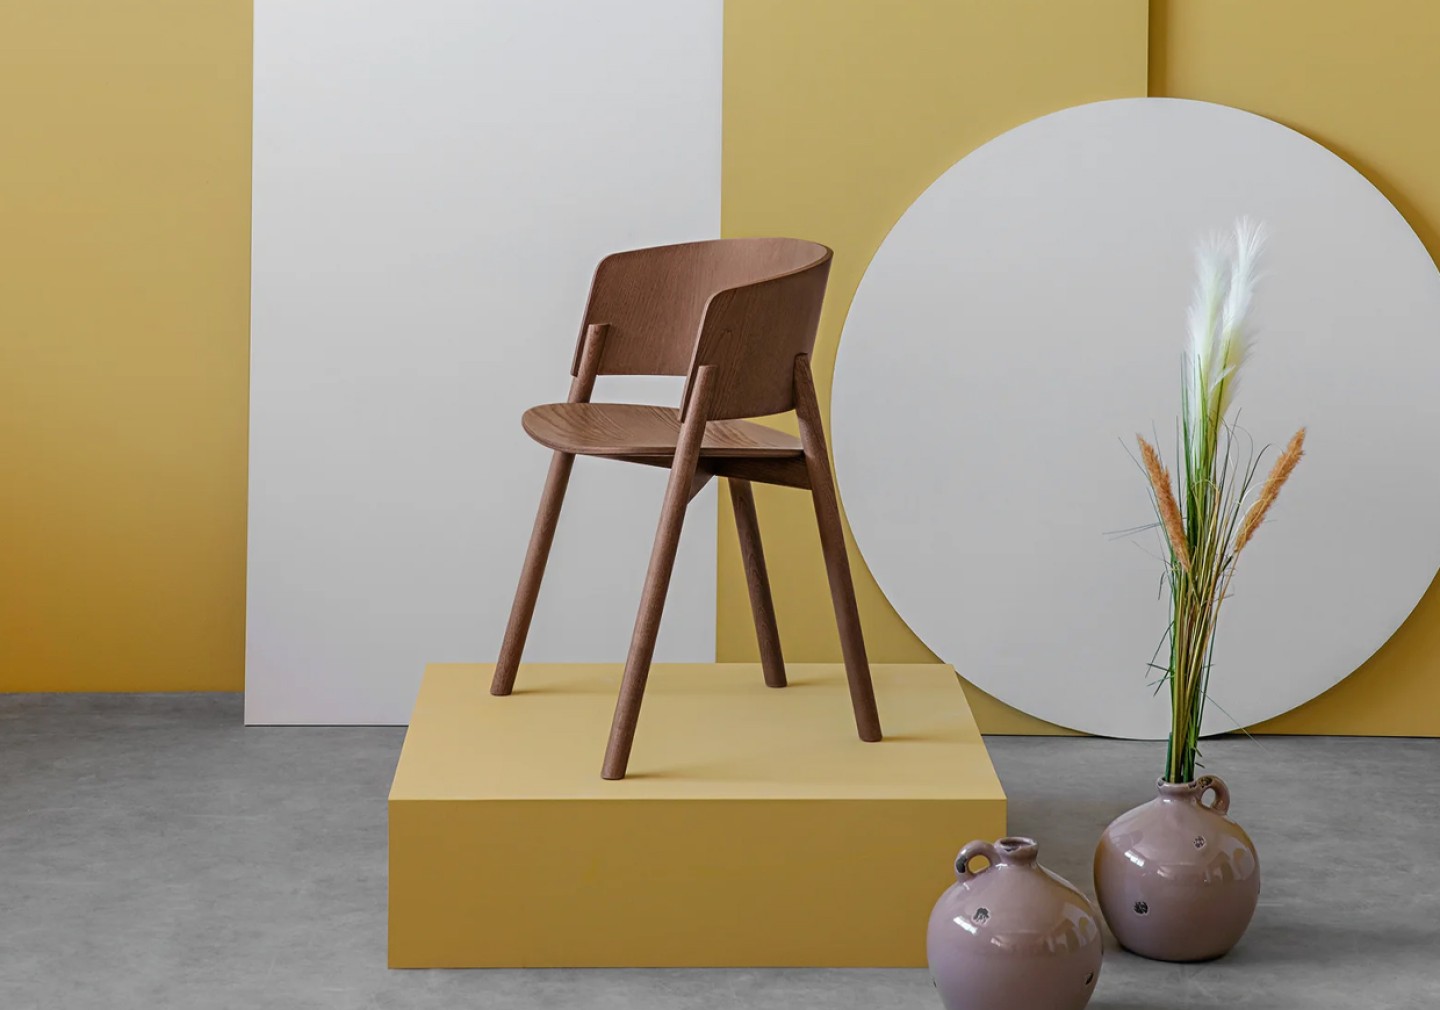 THE HALLA DINING CHAIR by Lorenz+Kaz